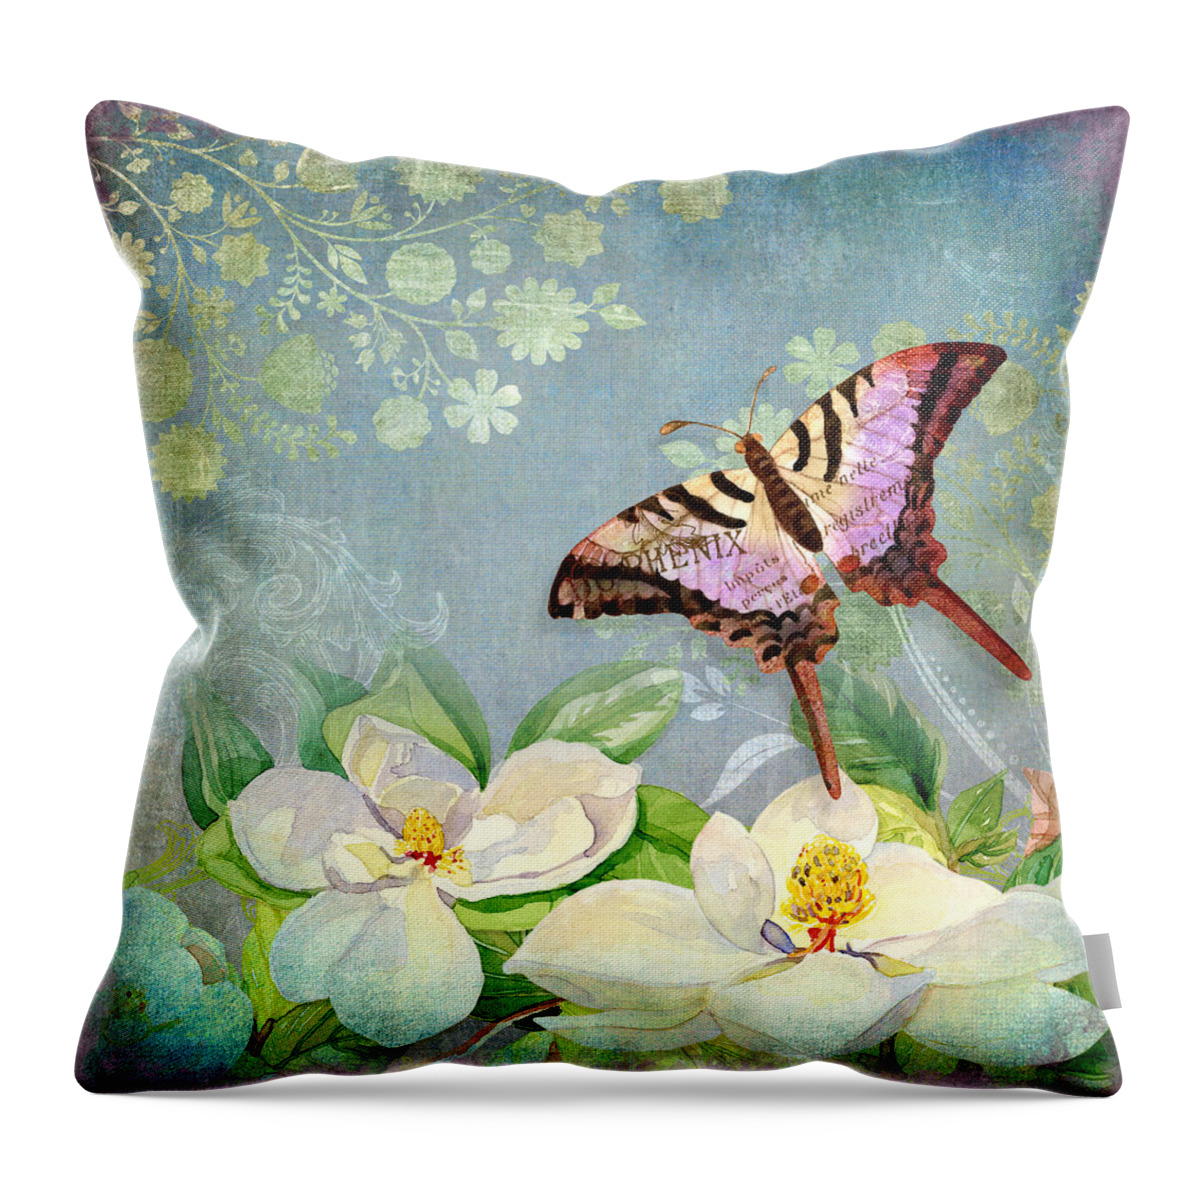 Magnolia Flowers Throw Pillow featuring the painting Magnolia Dreams by Audrey Jeanne Roberts